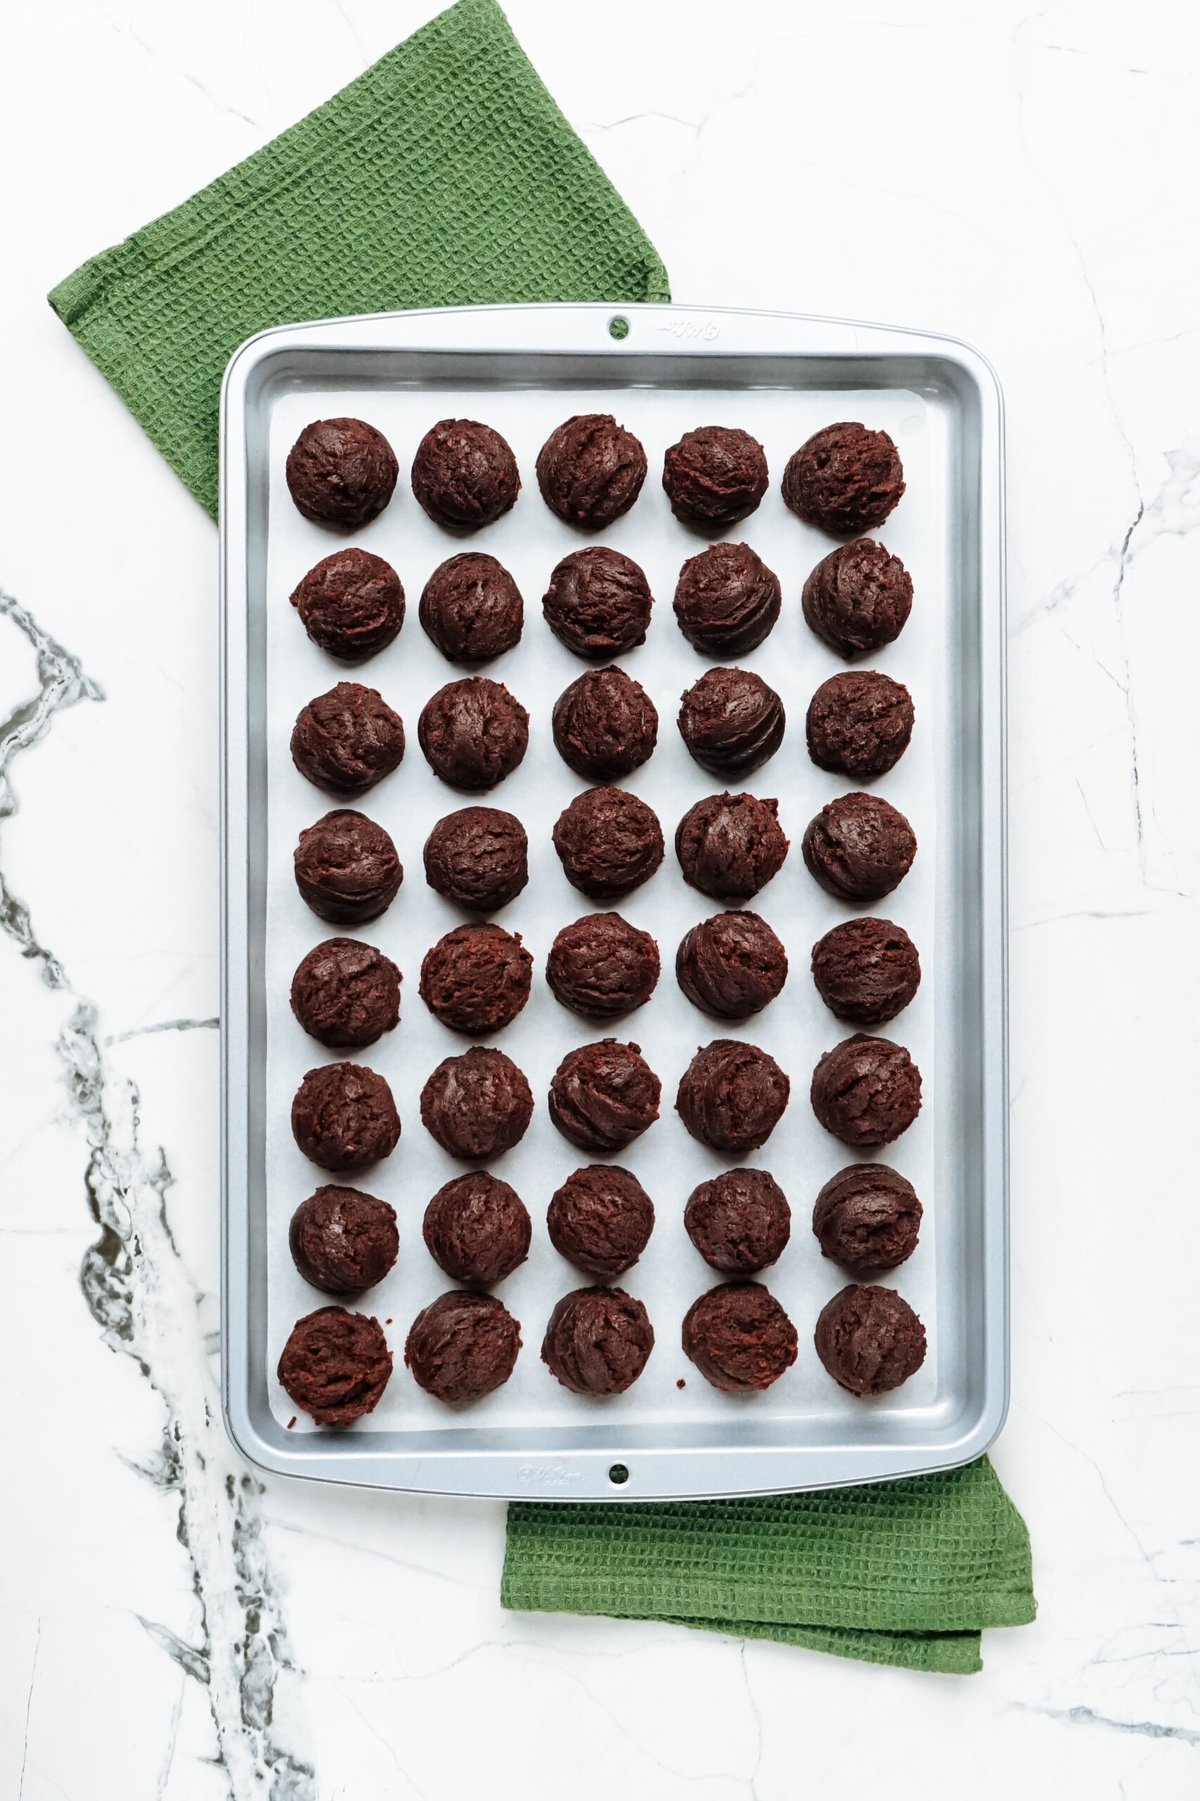 Chocolate truffles on a baking sheet with a green cloth.